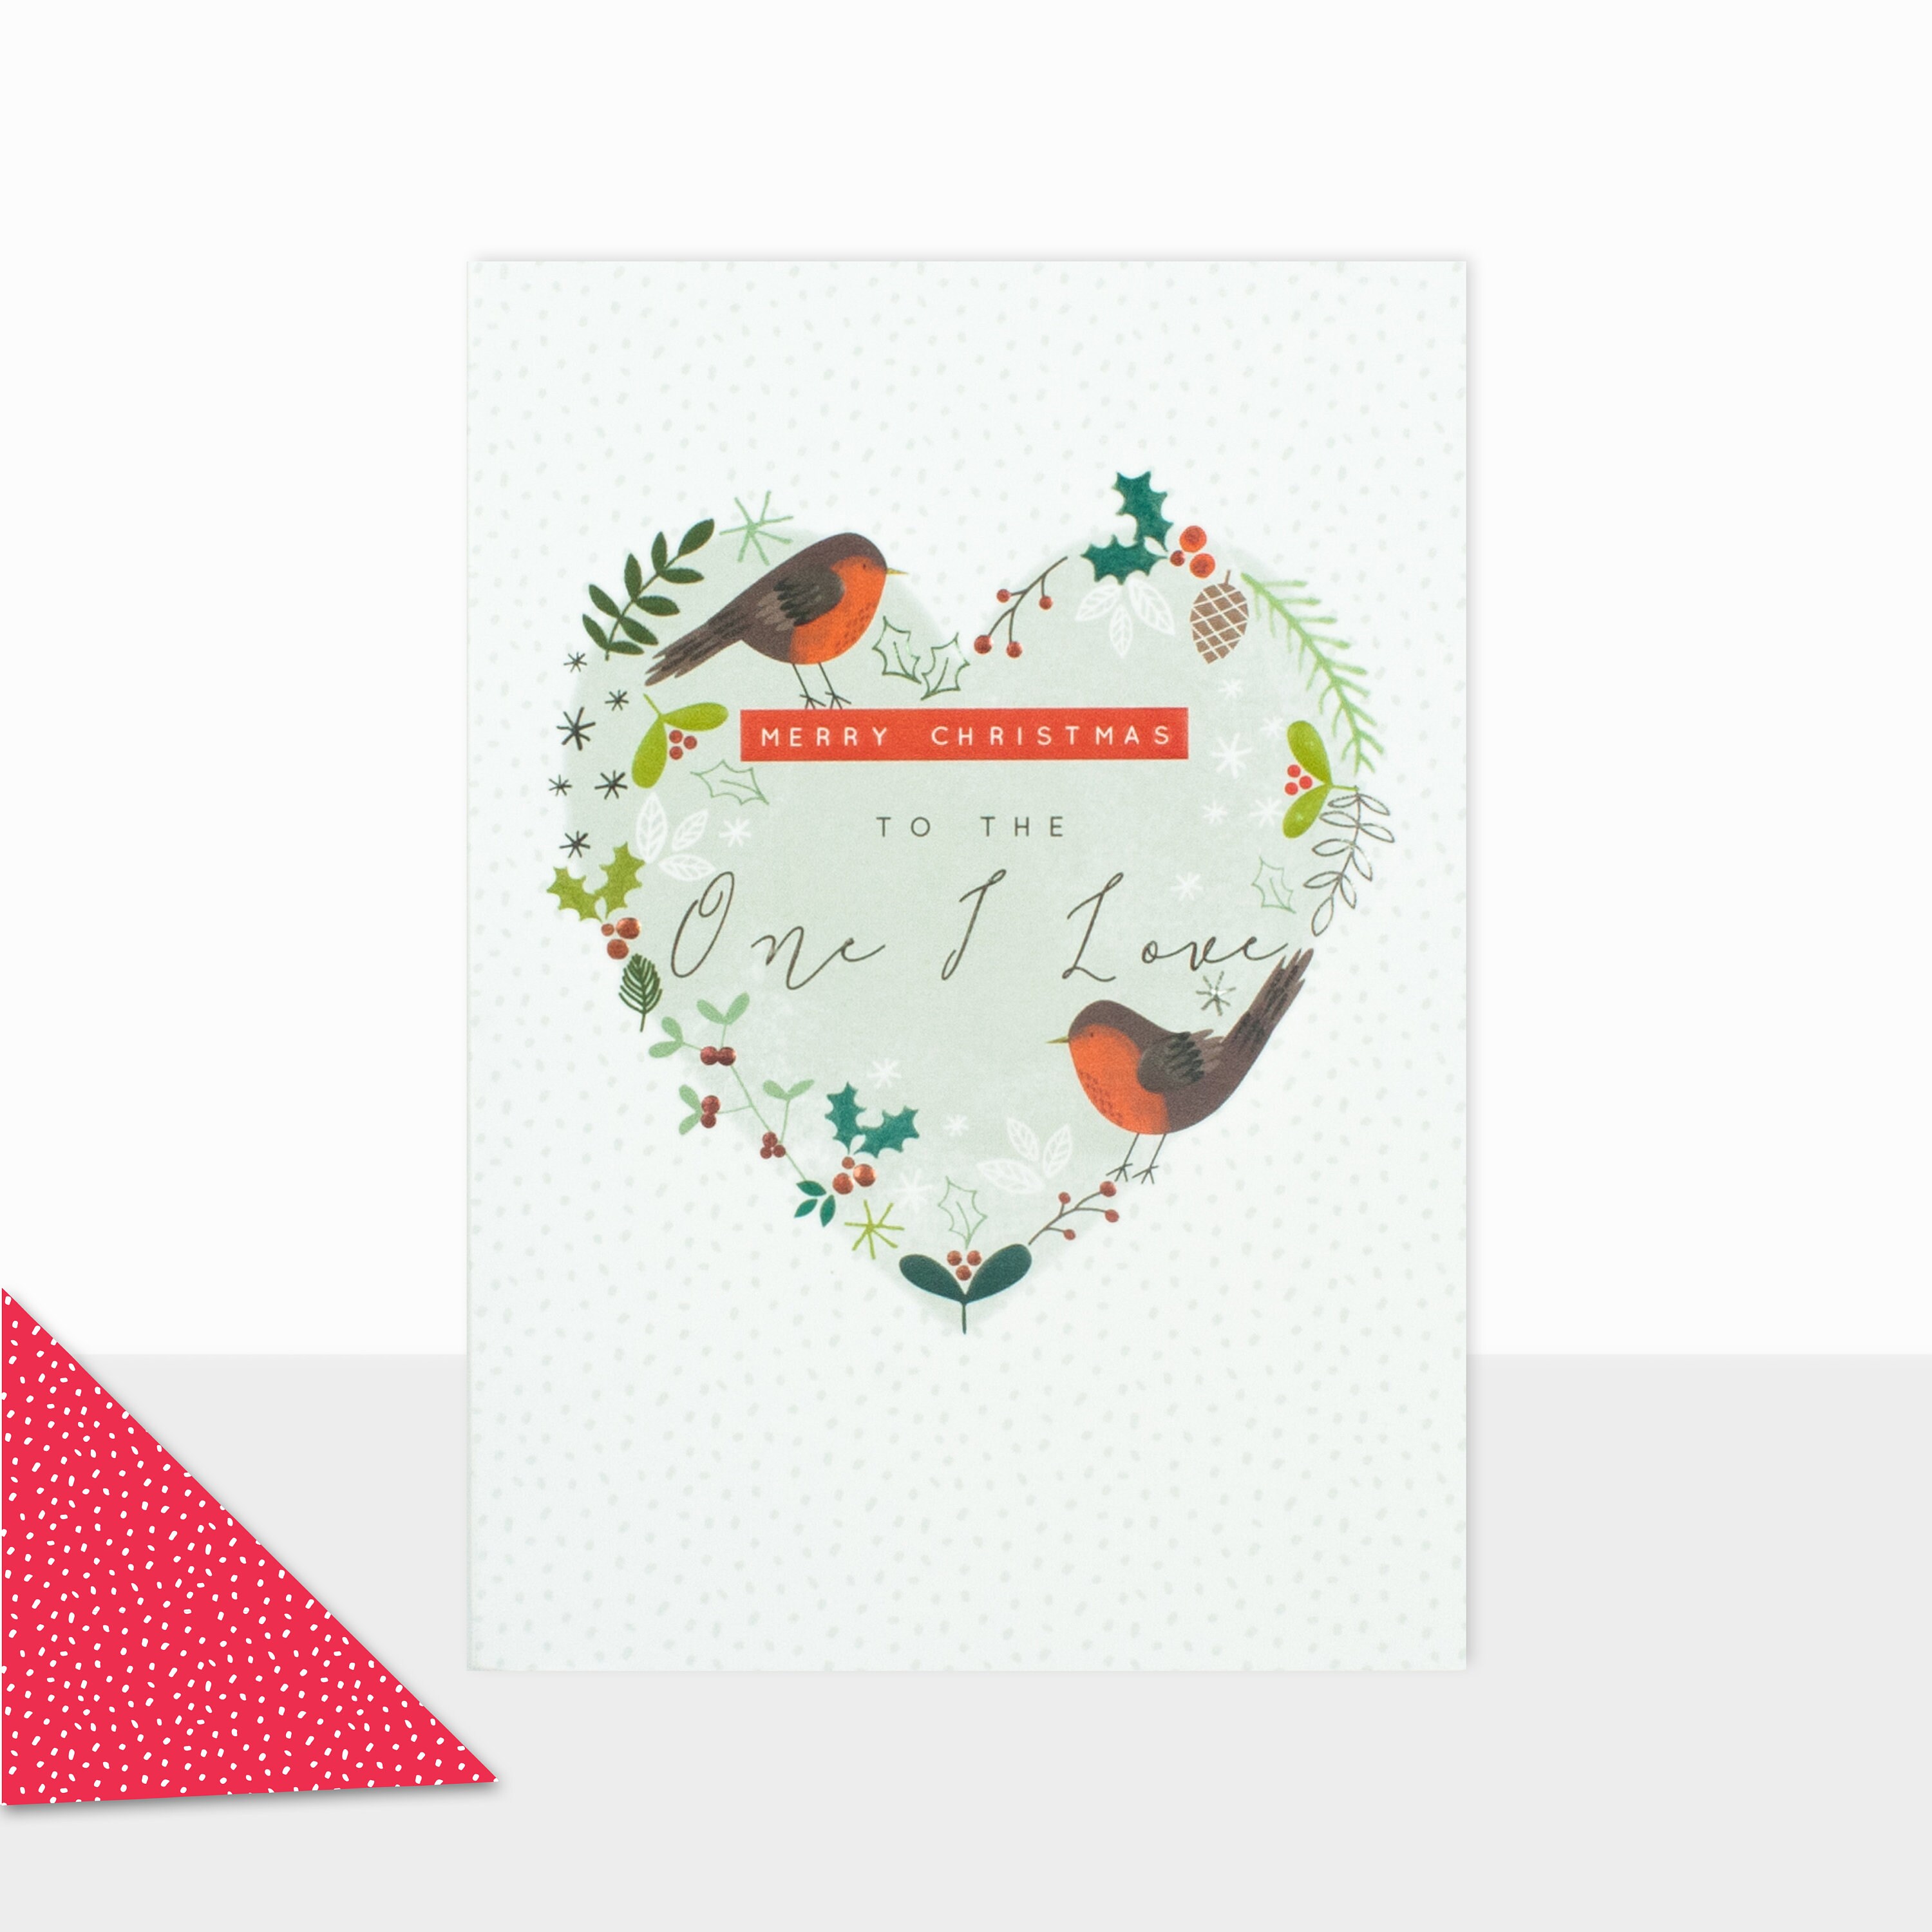 To the one i Love Greetings Card Halcyon Collection Happy Christmas Card HY121 New to Etsy